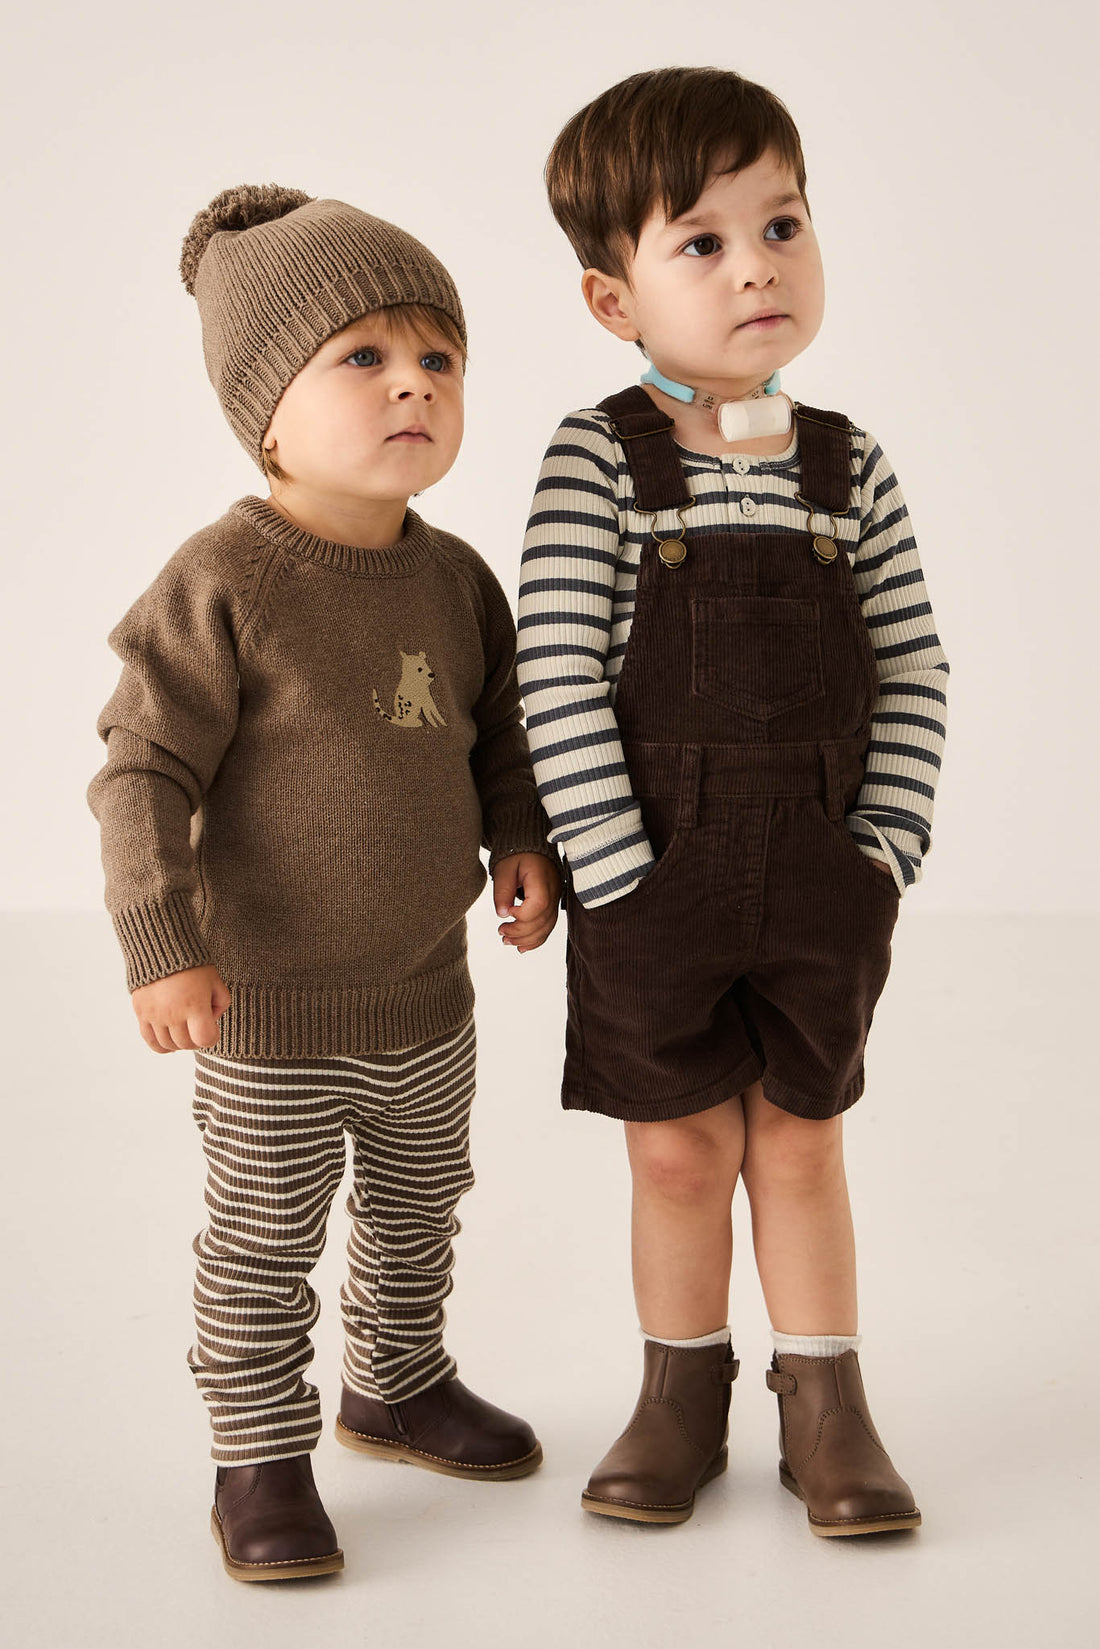 Casey Cord Short Overall - Bear Childrens Overall from Jamie Kay NZ